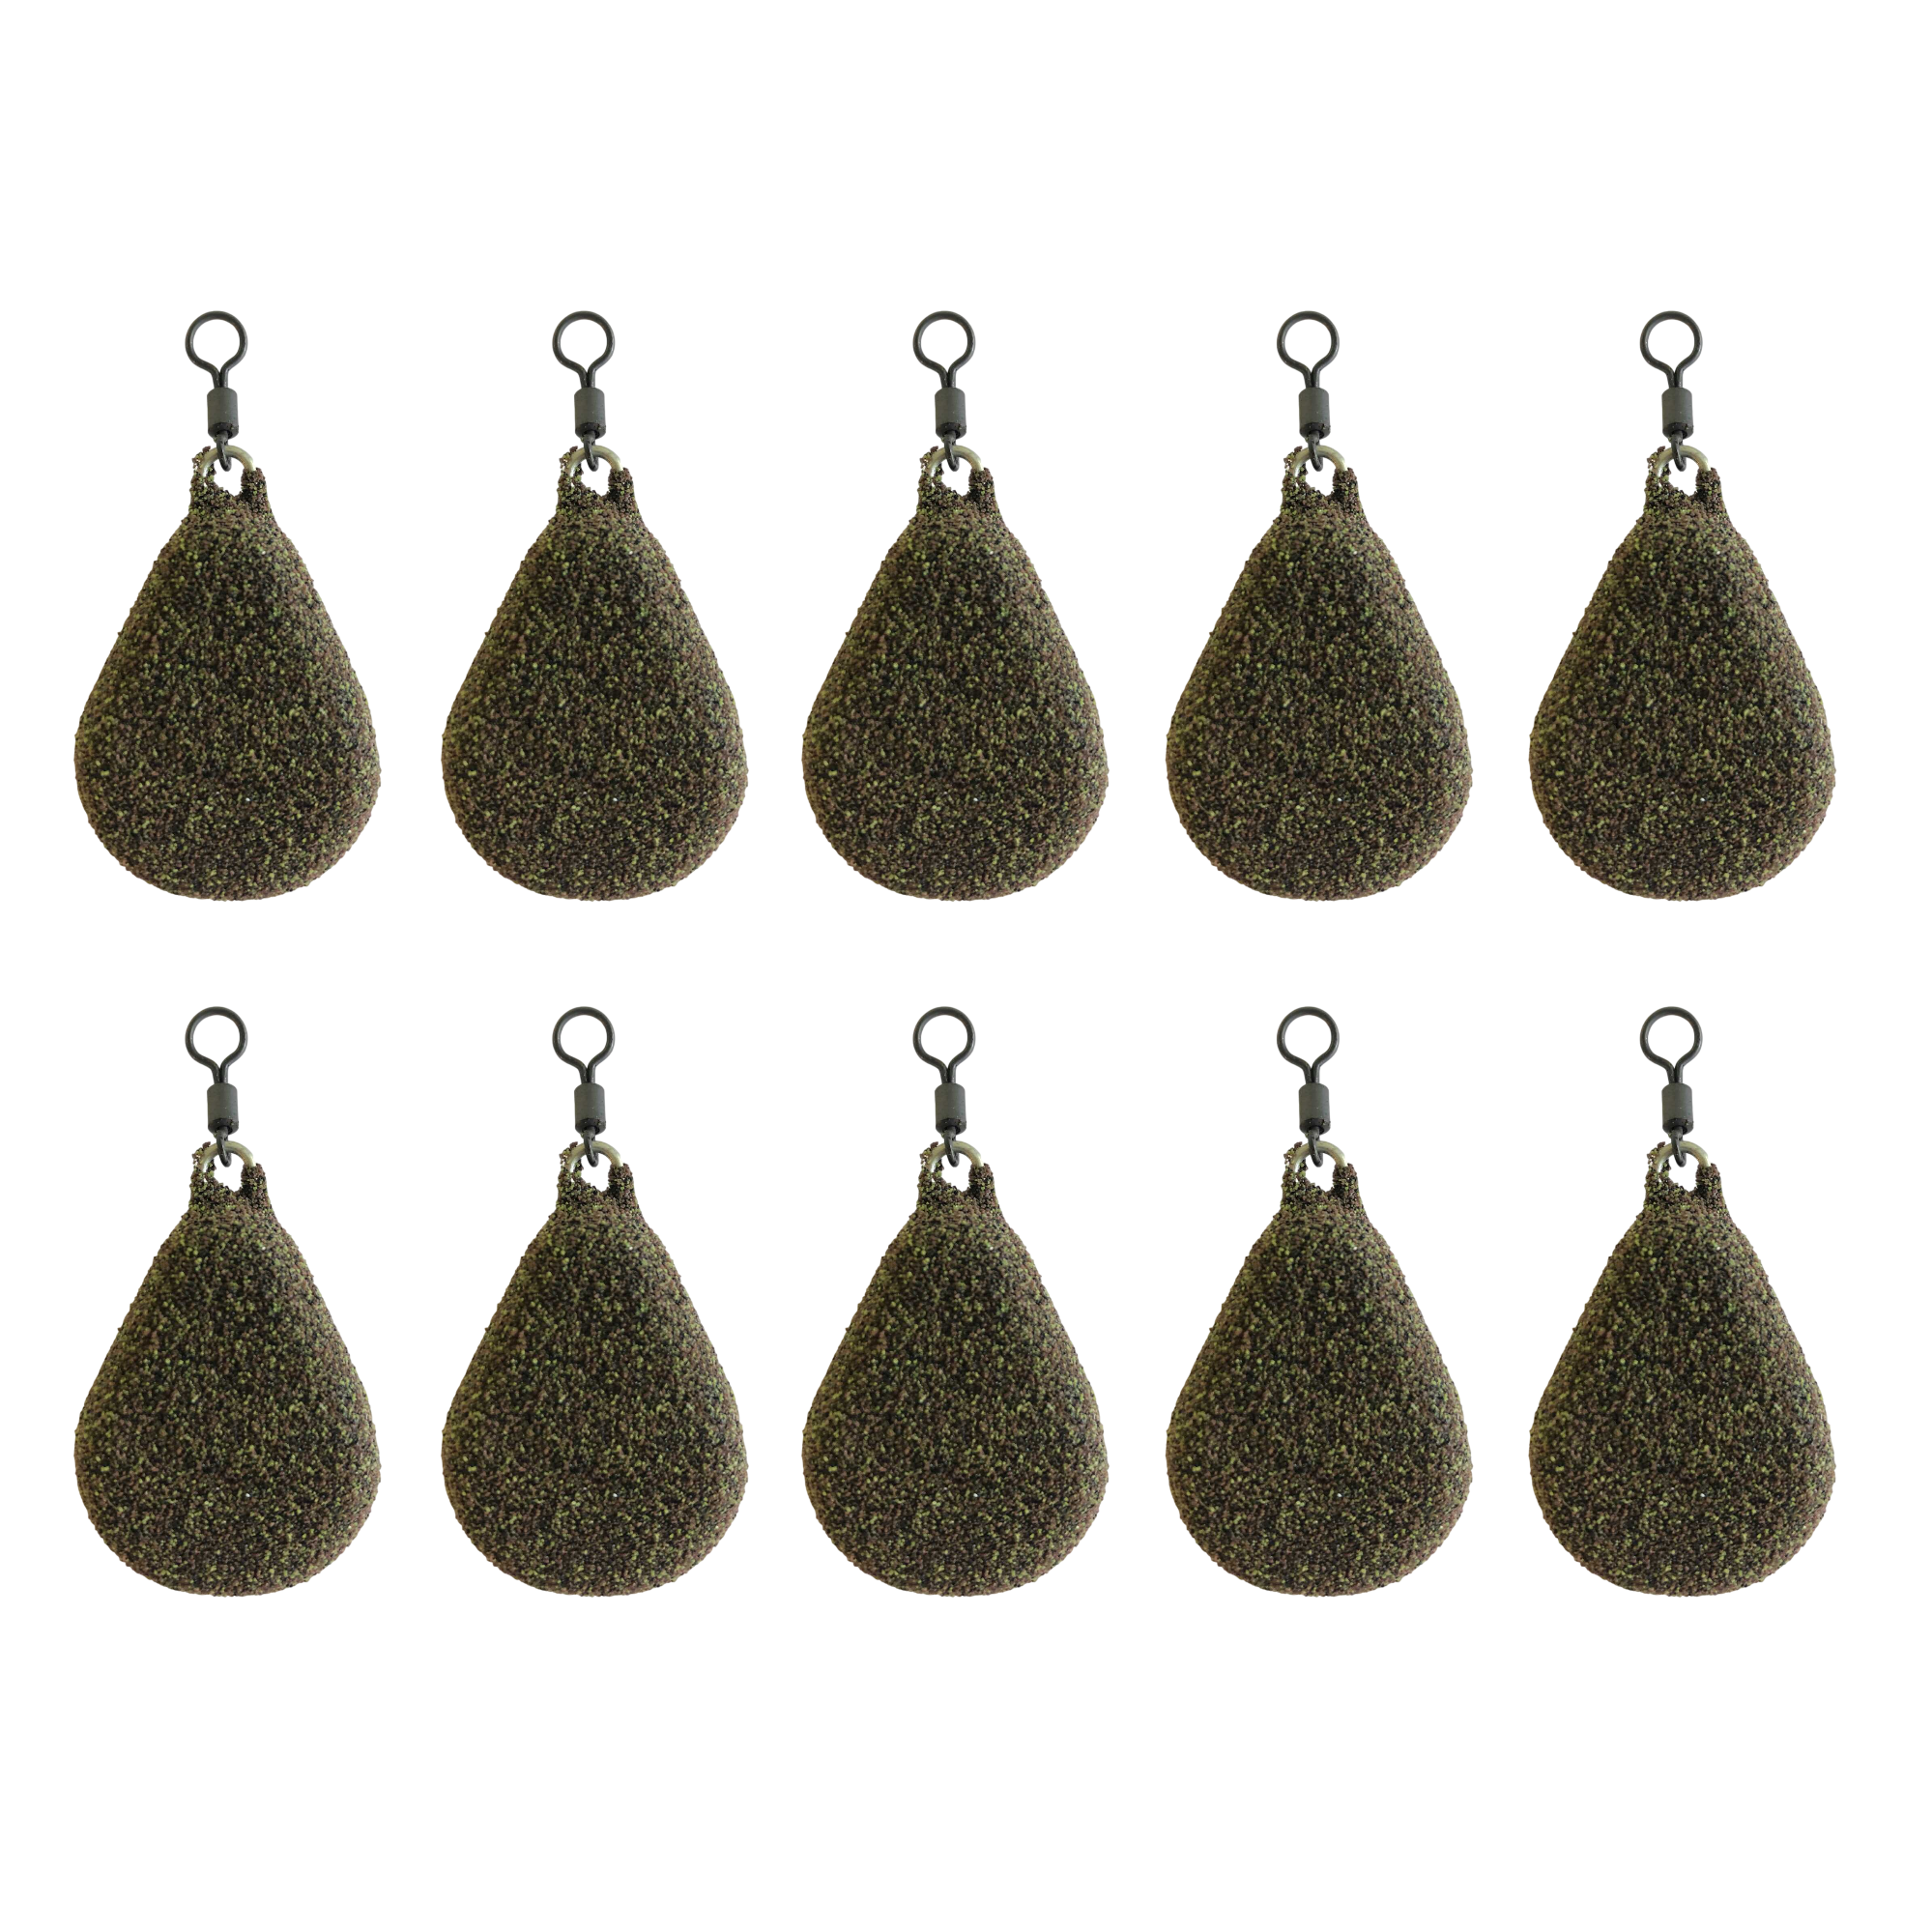 Carp Fishing Pear Leads 1.125 1.5 2 2.5oz with Swivel 10 Pack Weights Lead NGT 